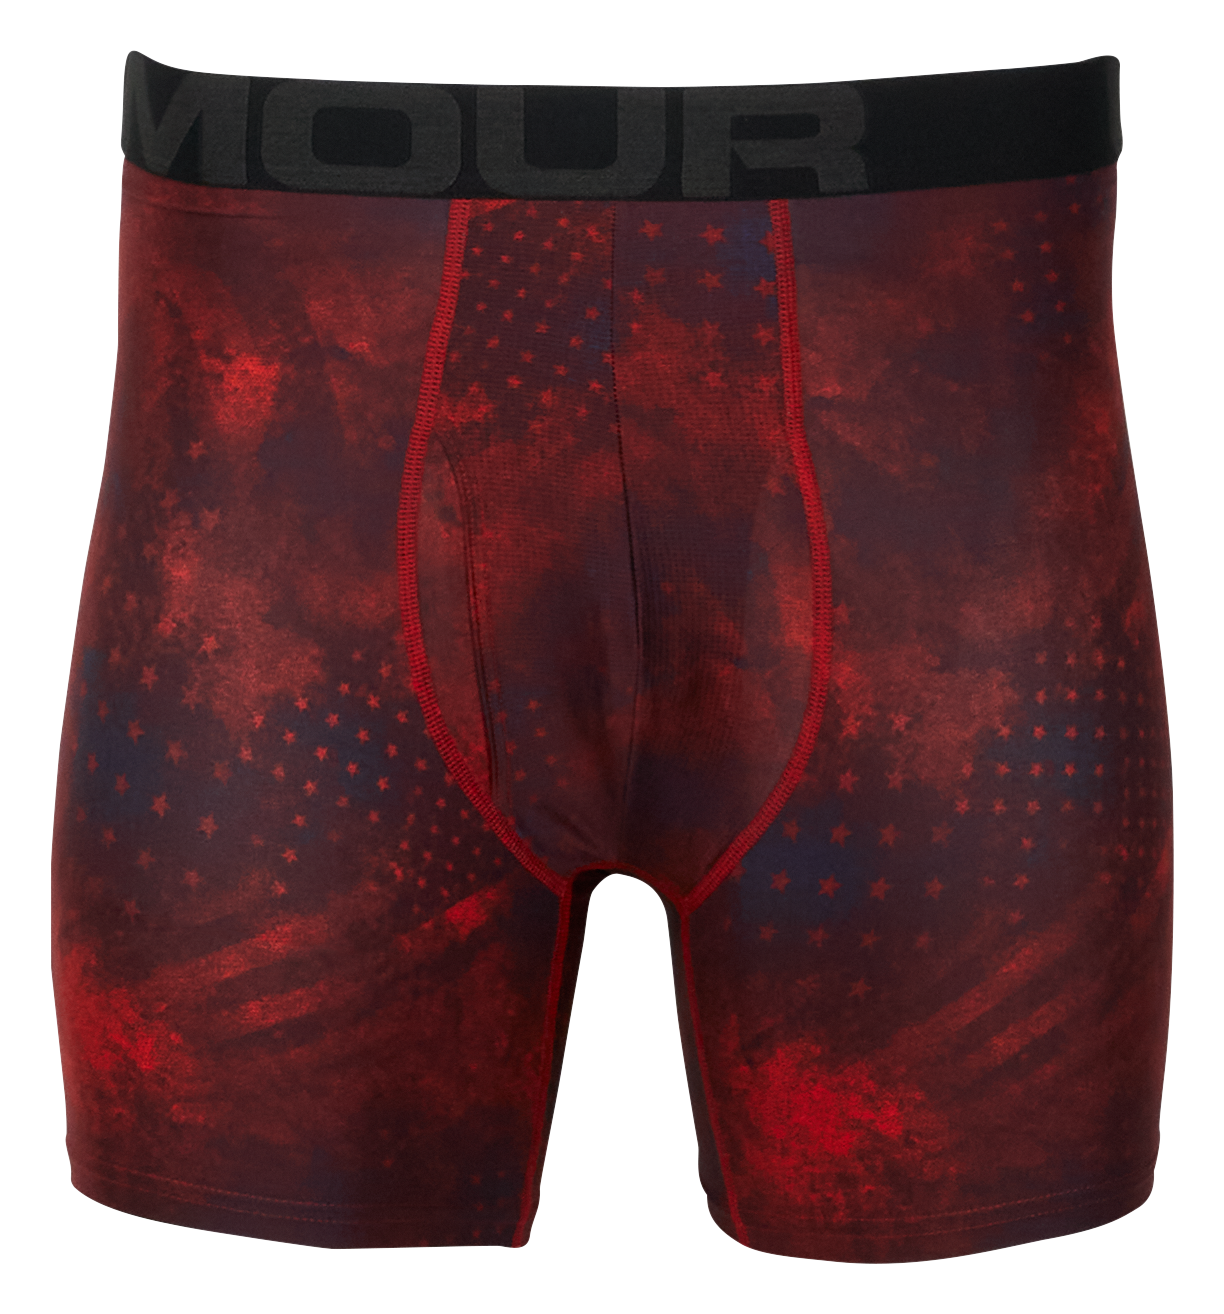 Under Armour Tech 6"" Patterned Boxerjock Shorts for Men - Red/Jet Gray - 2XL